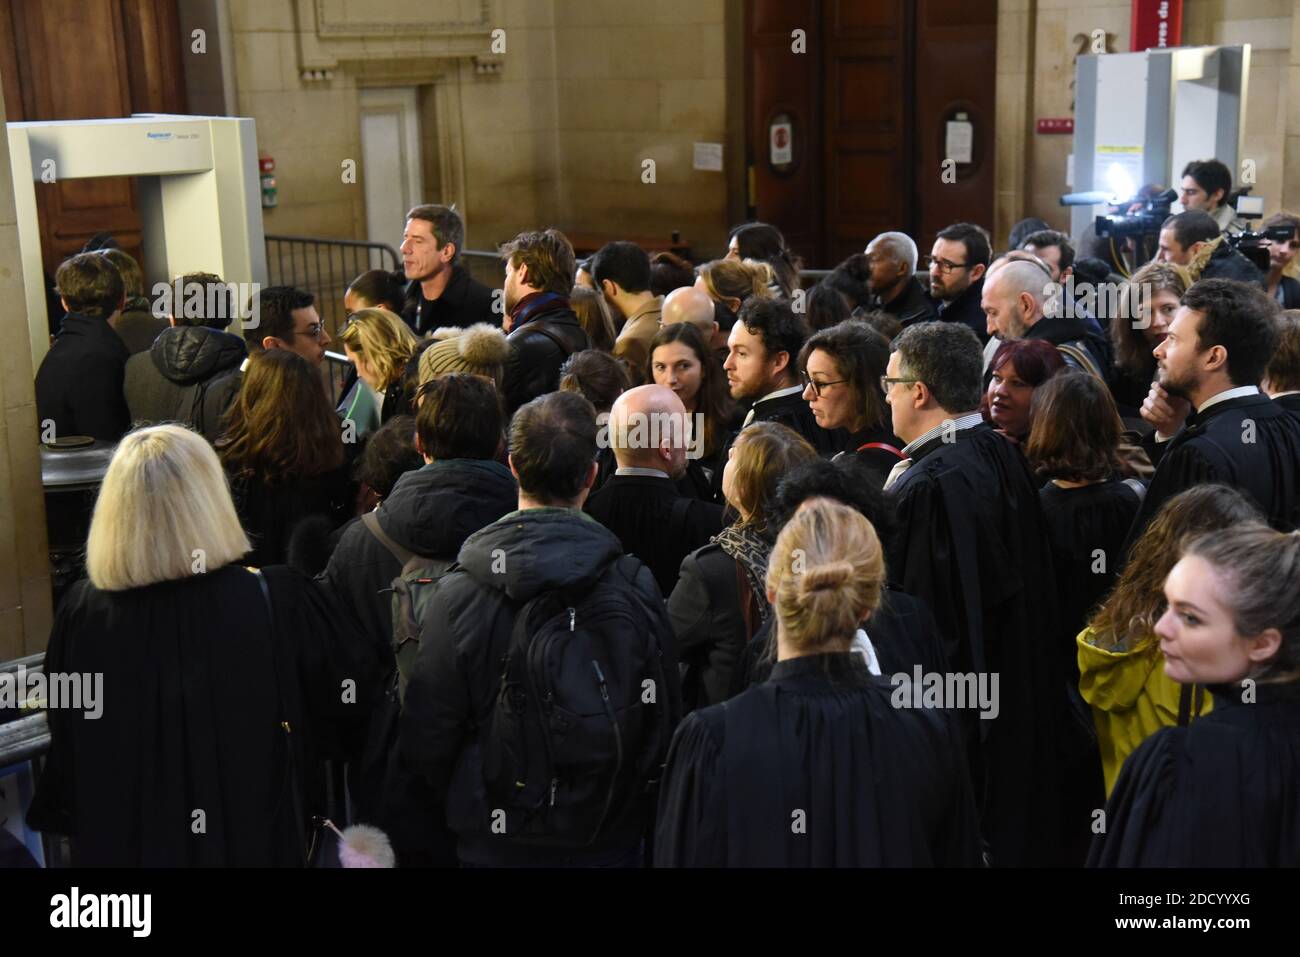 Atmosphere at Jawad Bendaoud's trial who is charged with harbouring jihadists during the November 2015 terror attacks, at the courthouse of Paris on January 24, 2018. The first trial stemming from the November 2015 Paris terror attacks opens when Jawad Bendaoud appears in court, charged with harbouring two of the jihadists in the aftermath of the carnage. Photo by Alain Apaydin/ABACAPRESS.COM Stock Photo